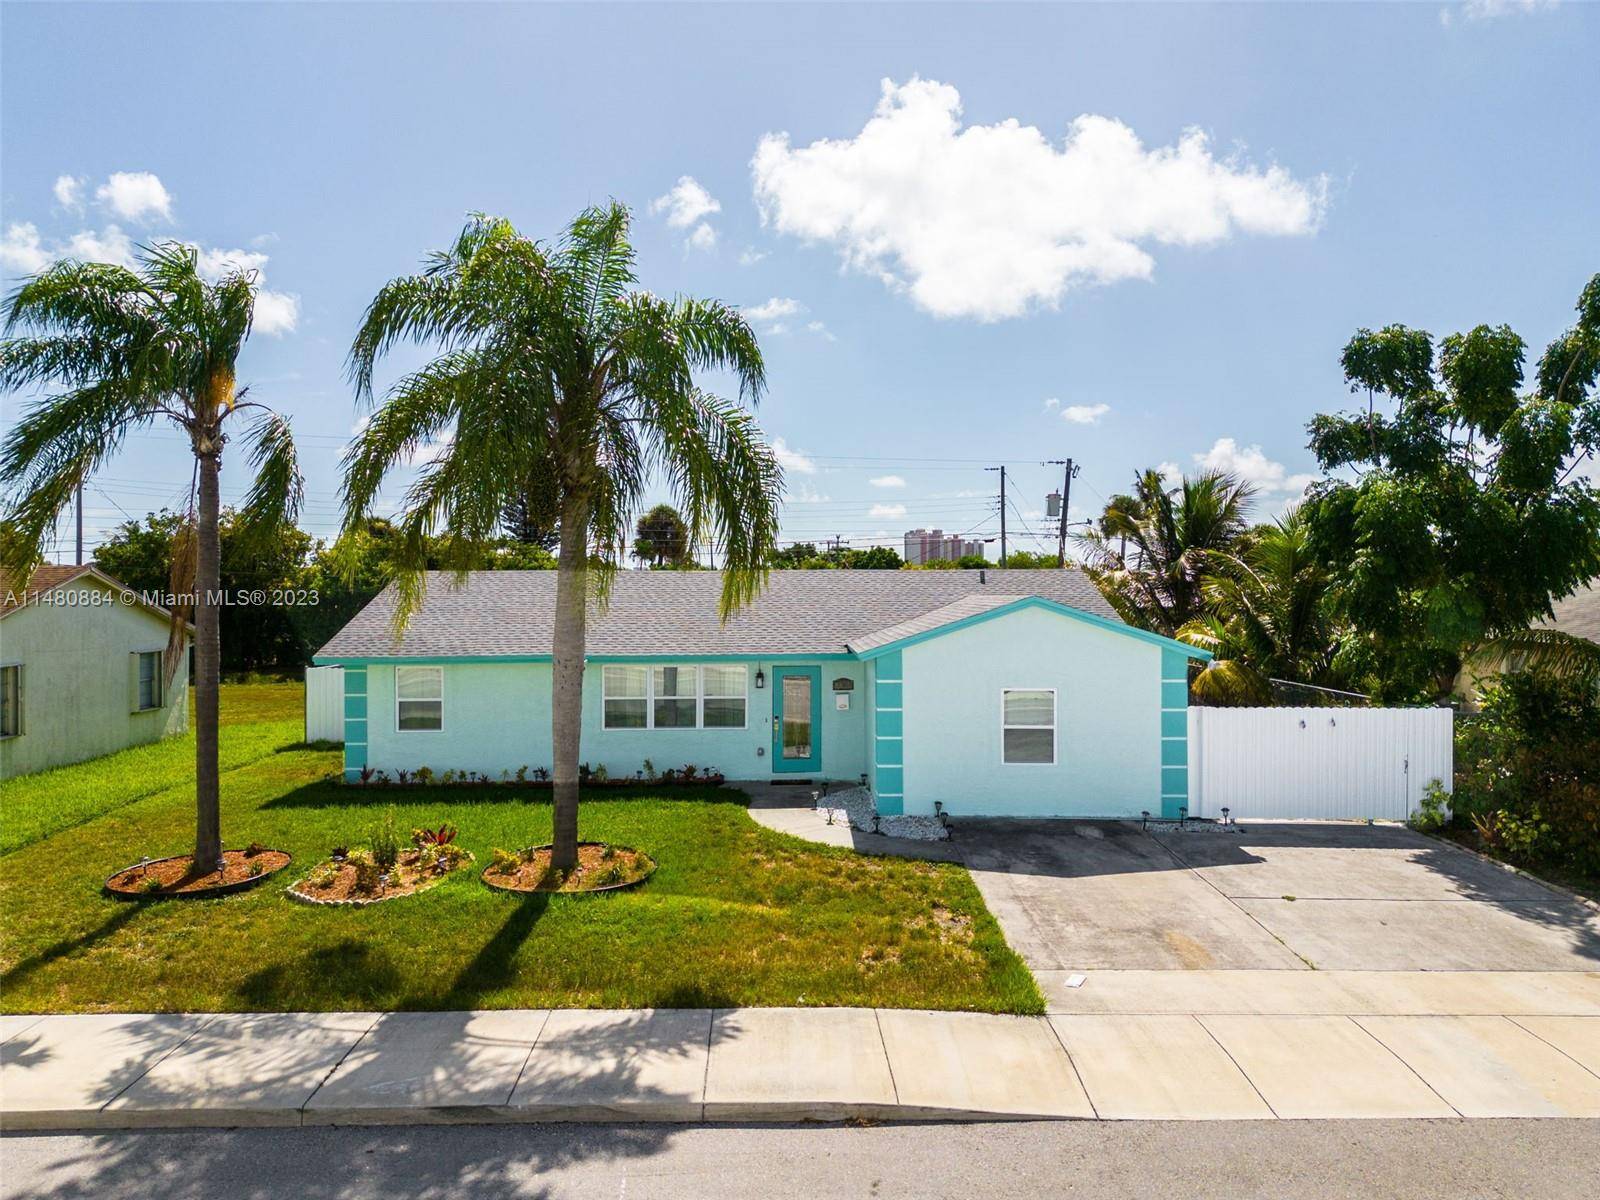 This single family home is located in the heart of Riviera Beach, Florida.